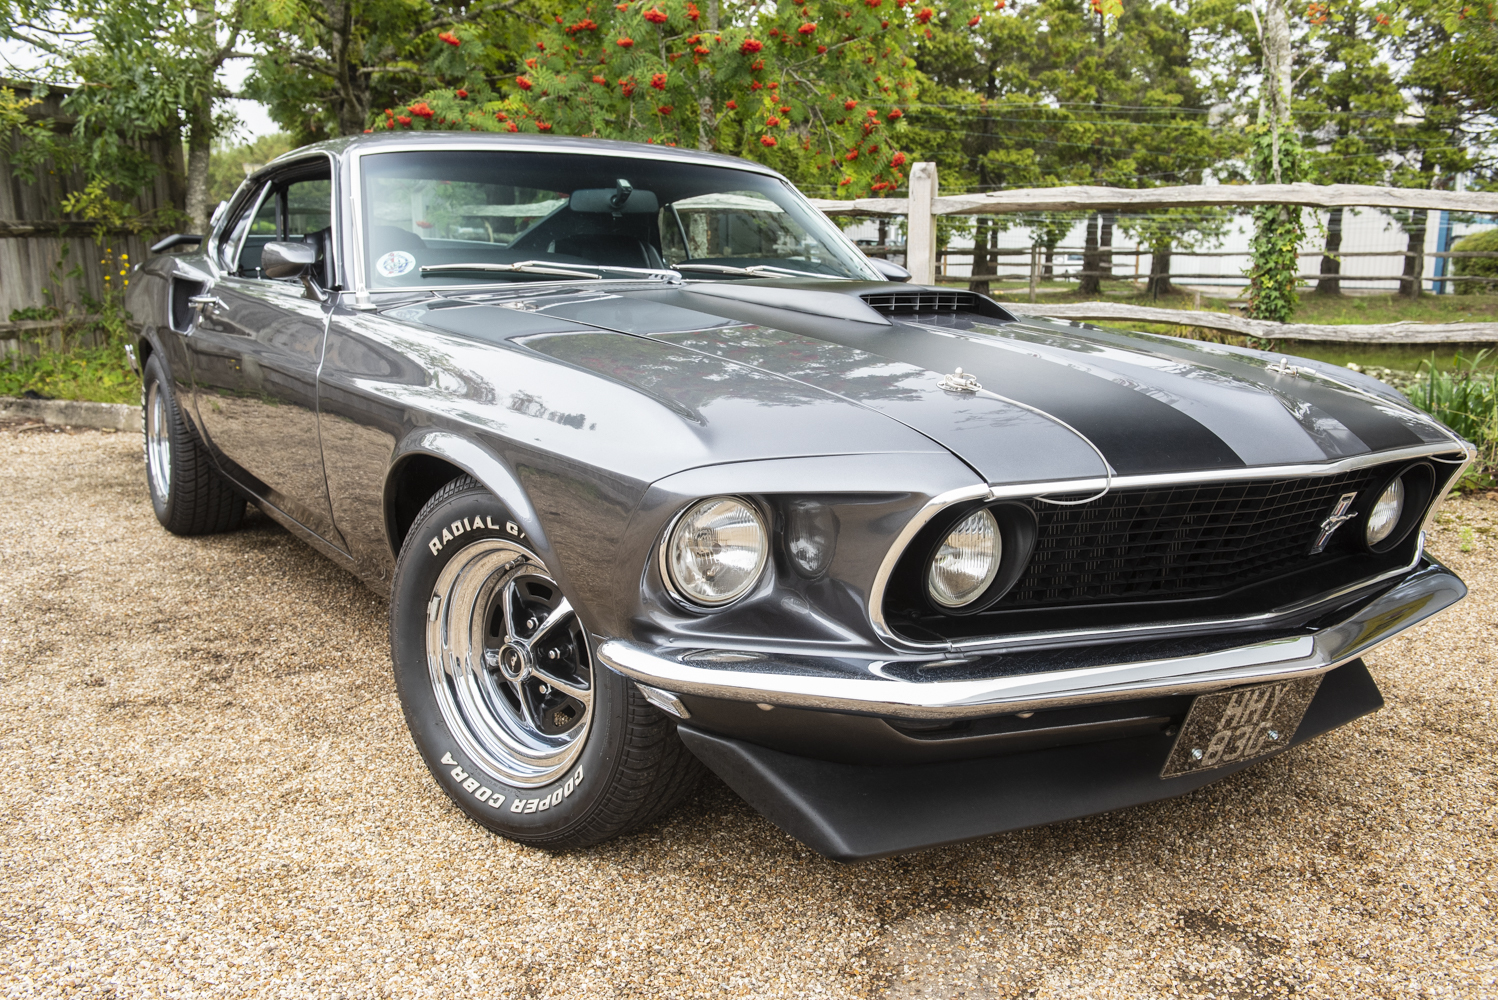 1969 Ford Mustang Restomod ‘John Wick’ Recreation SOLD - Muscle Car